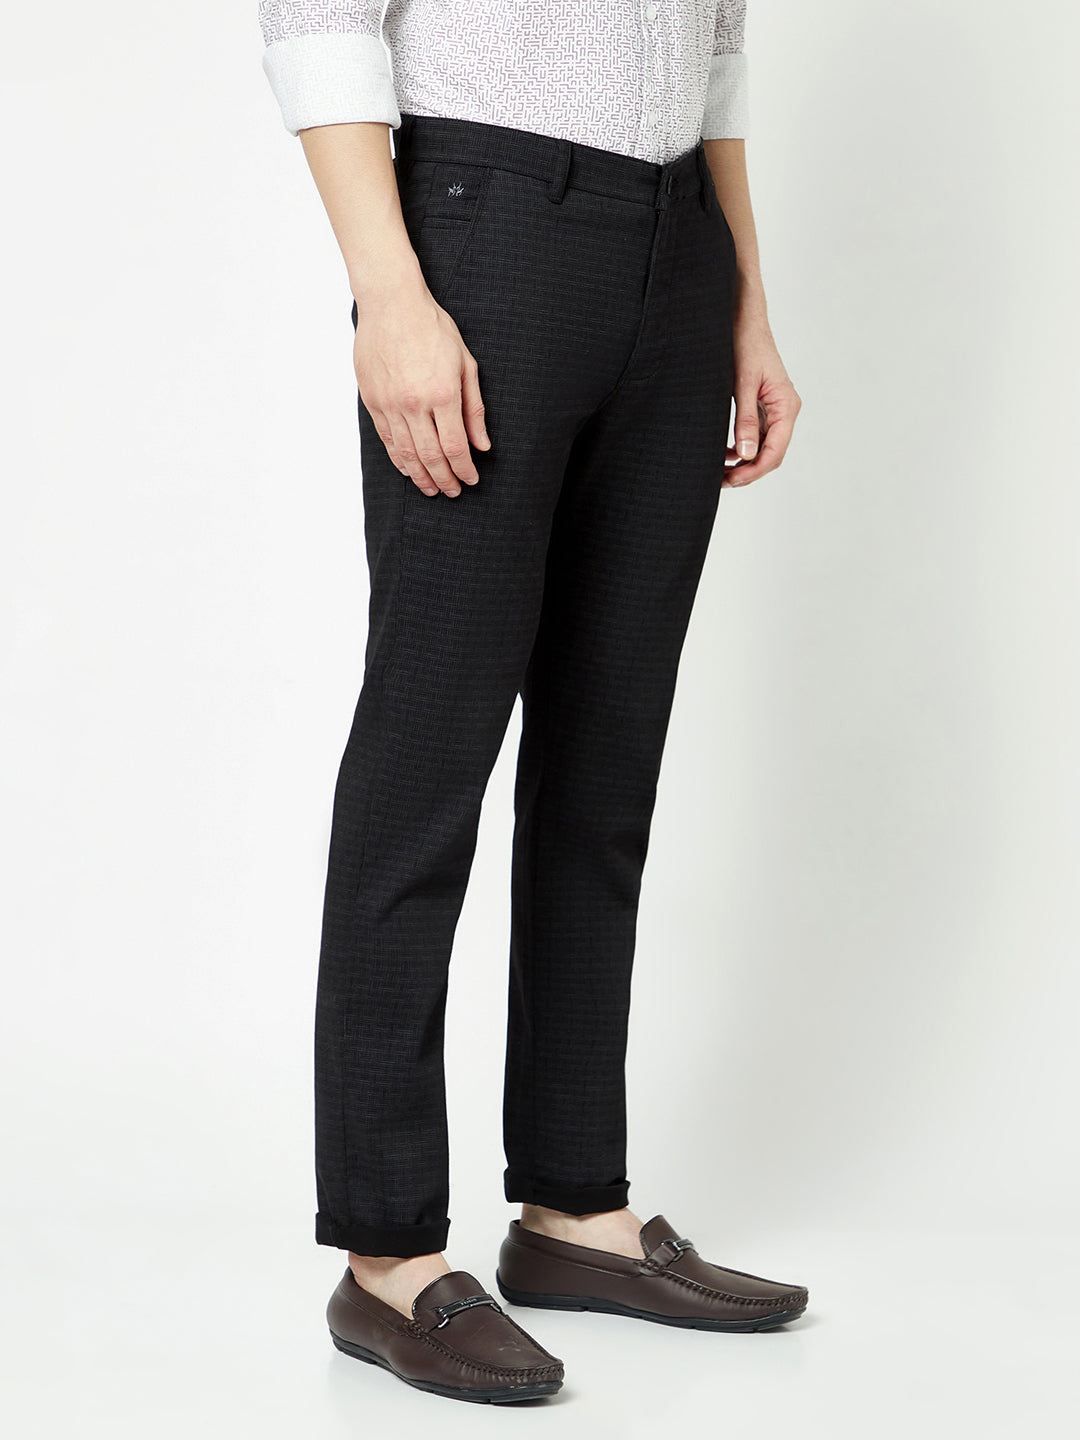 Buy West Vogue Easy Movement Ankle Length Pants Black at Rs1295 online   Activewear online